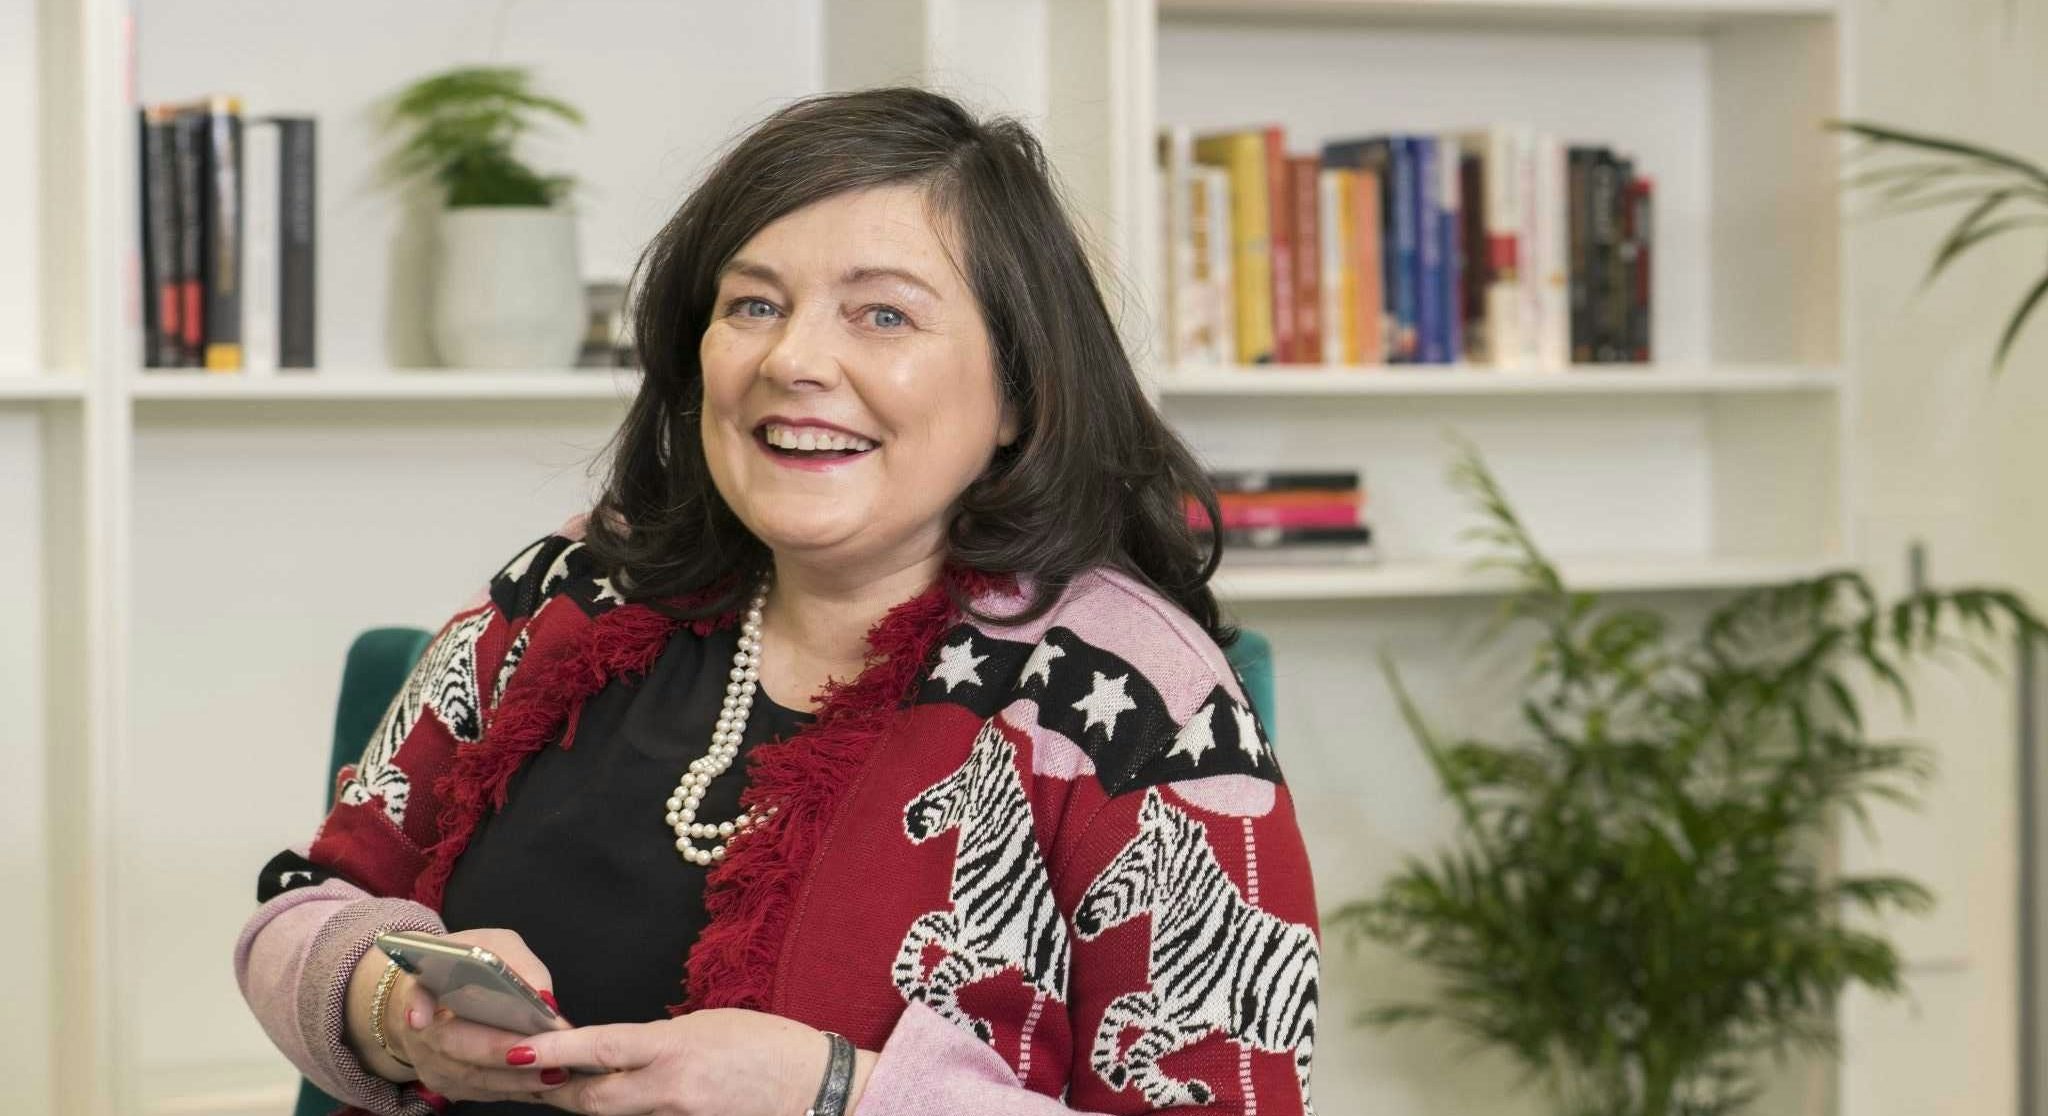 Anne Boden, the former CEO of Starling